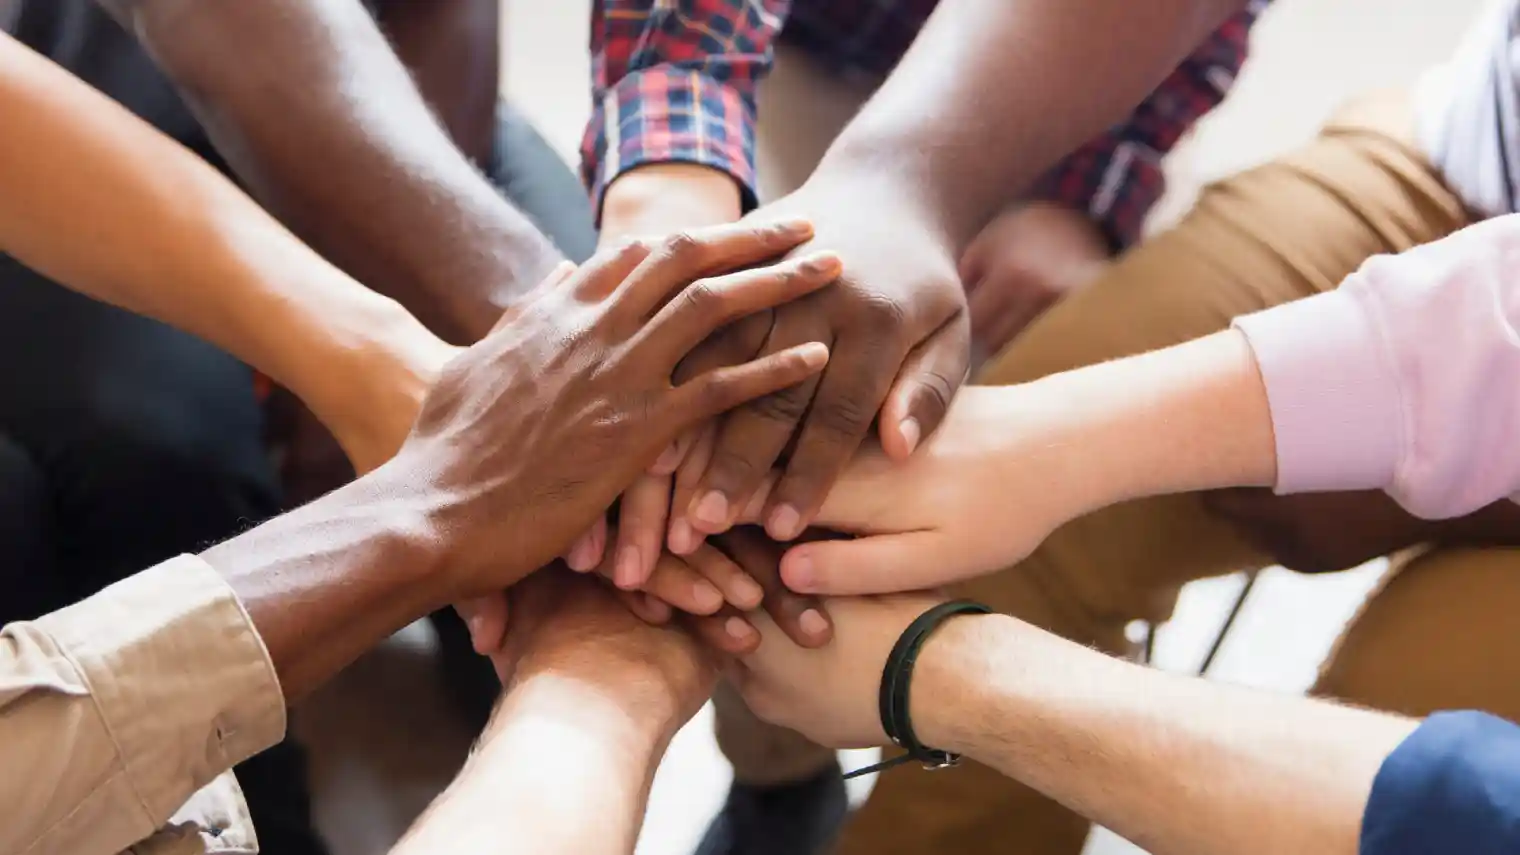 A group of diverse hands come together in a stack, signifying unity, support, and about us at Invigorate.